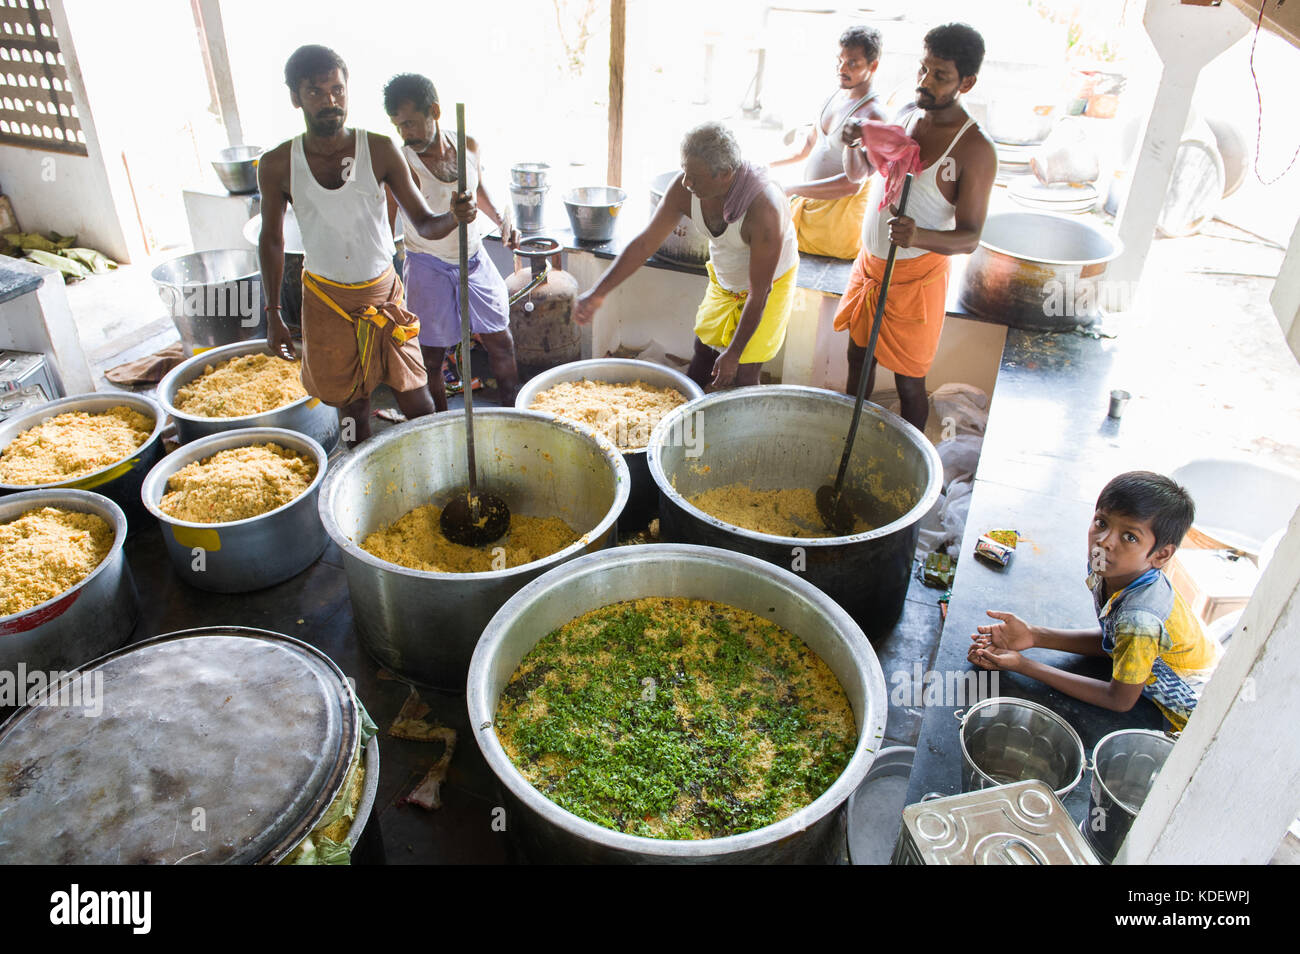 Making lunch for 5000 women during the 21st Annual Women's Solidarity Festival at AVAG. An event with 5000 women from the Bio-region of Auroville Stock Photo